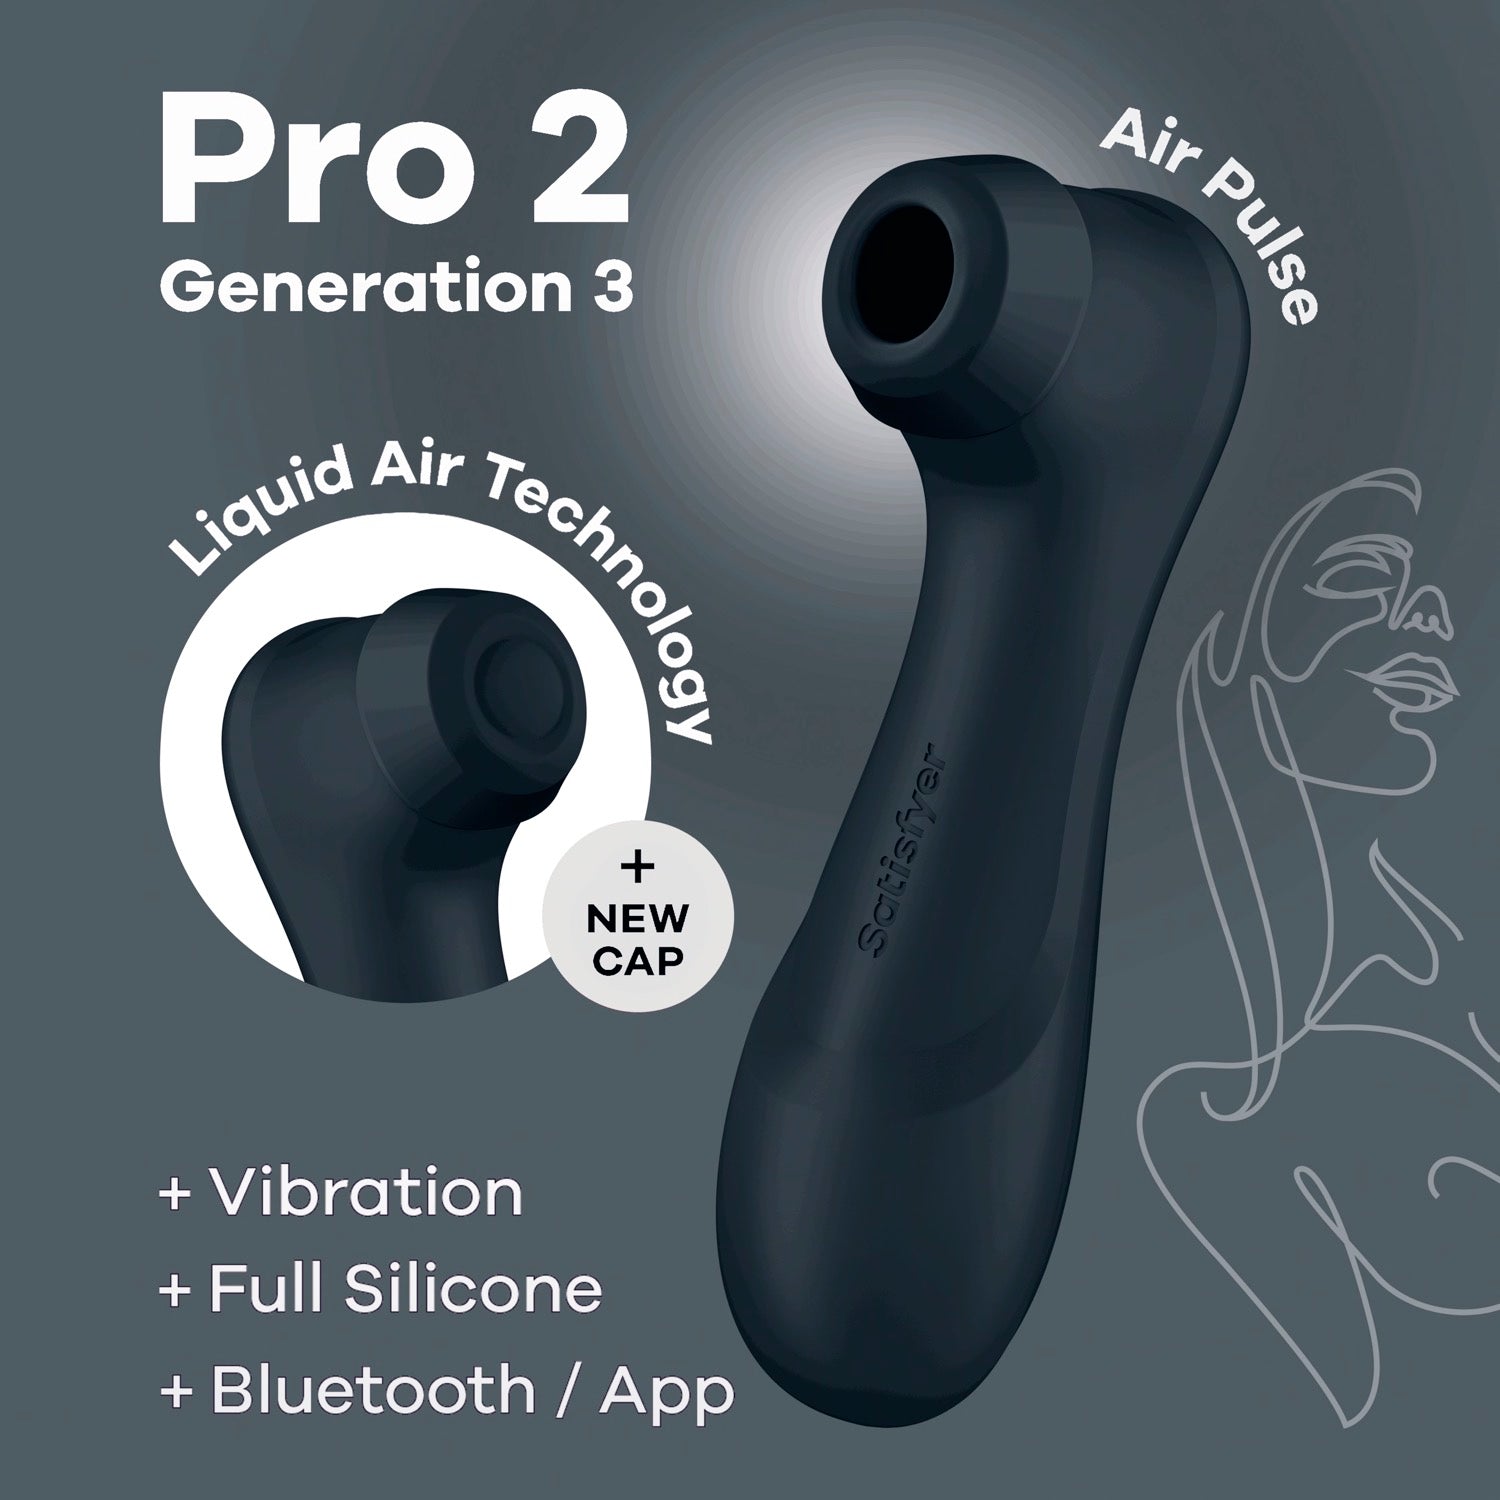 Satisfyer Pro 2 Generation 3 with App Control - Black by Satisfyer